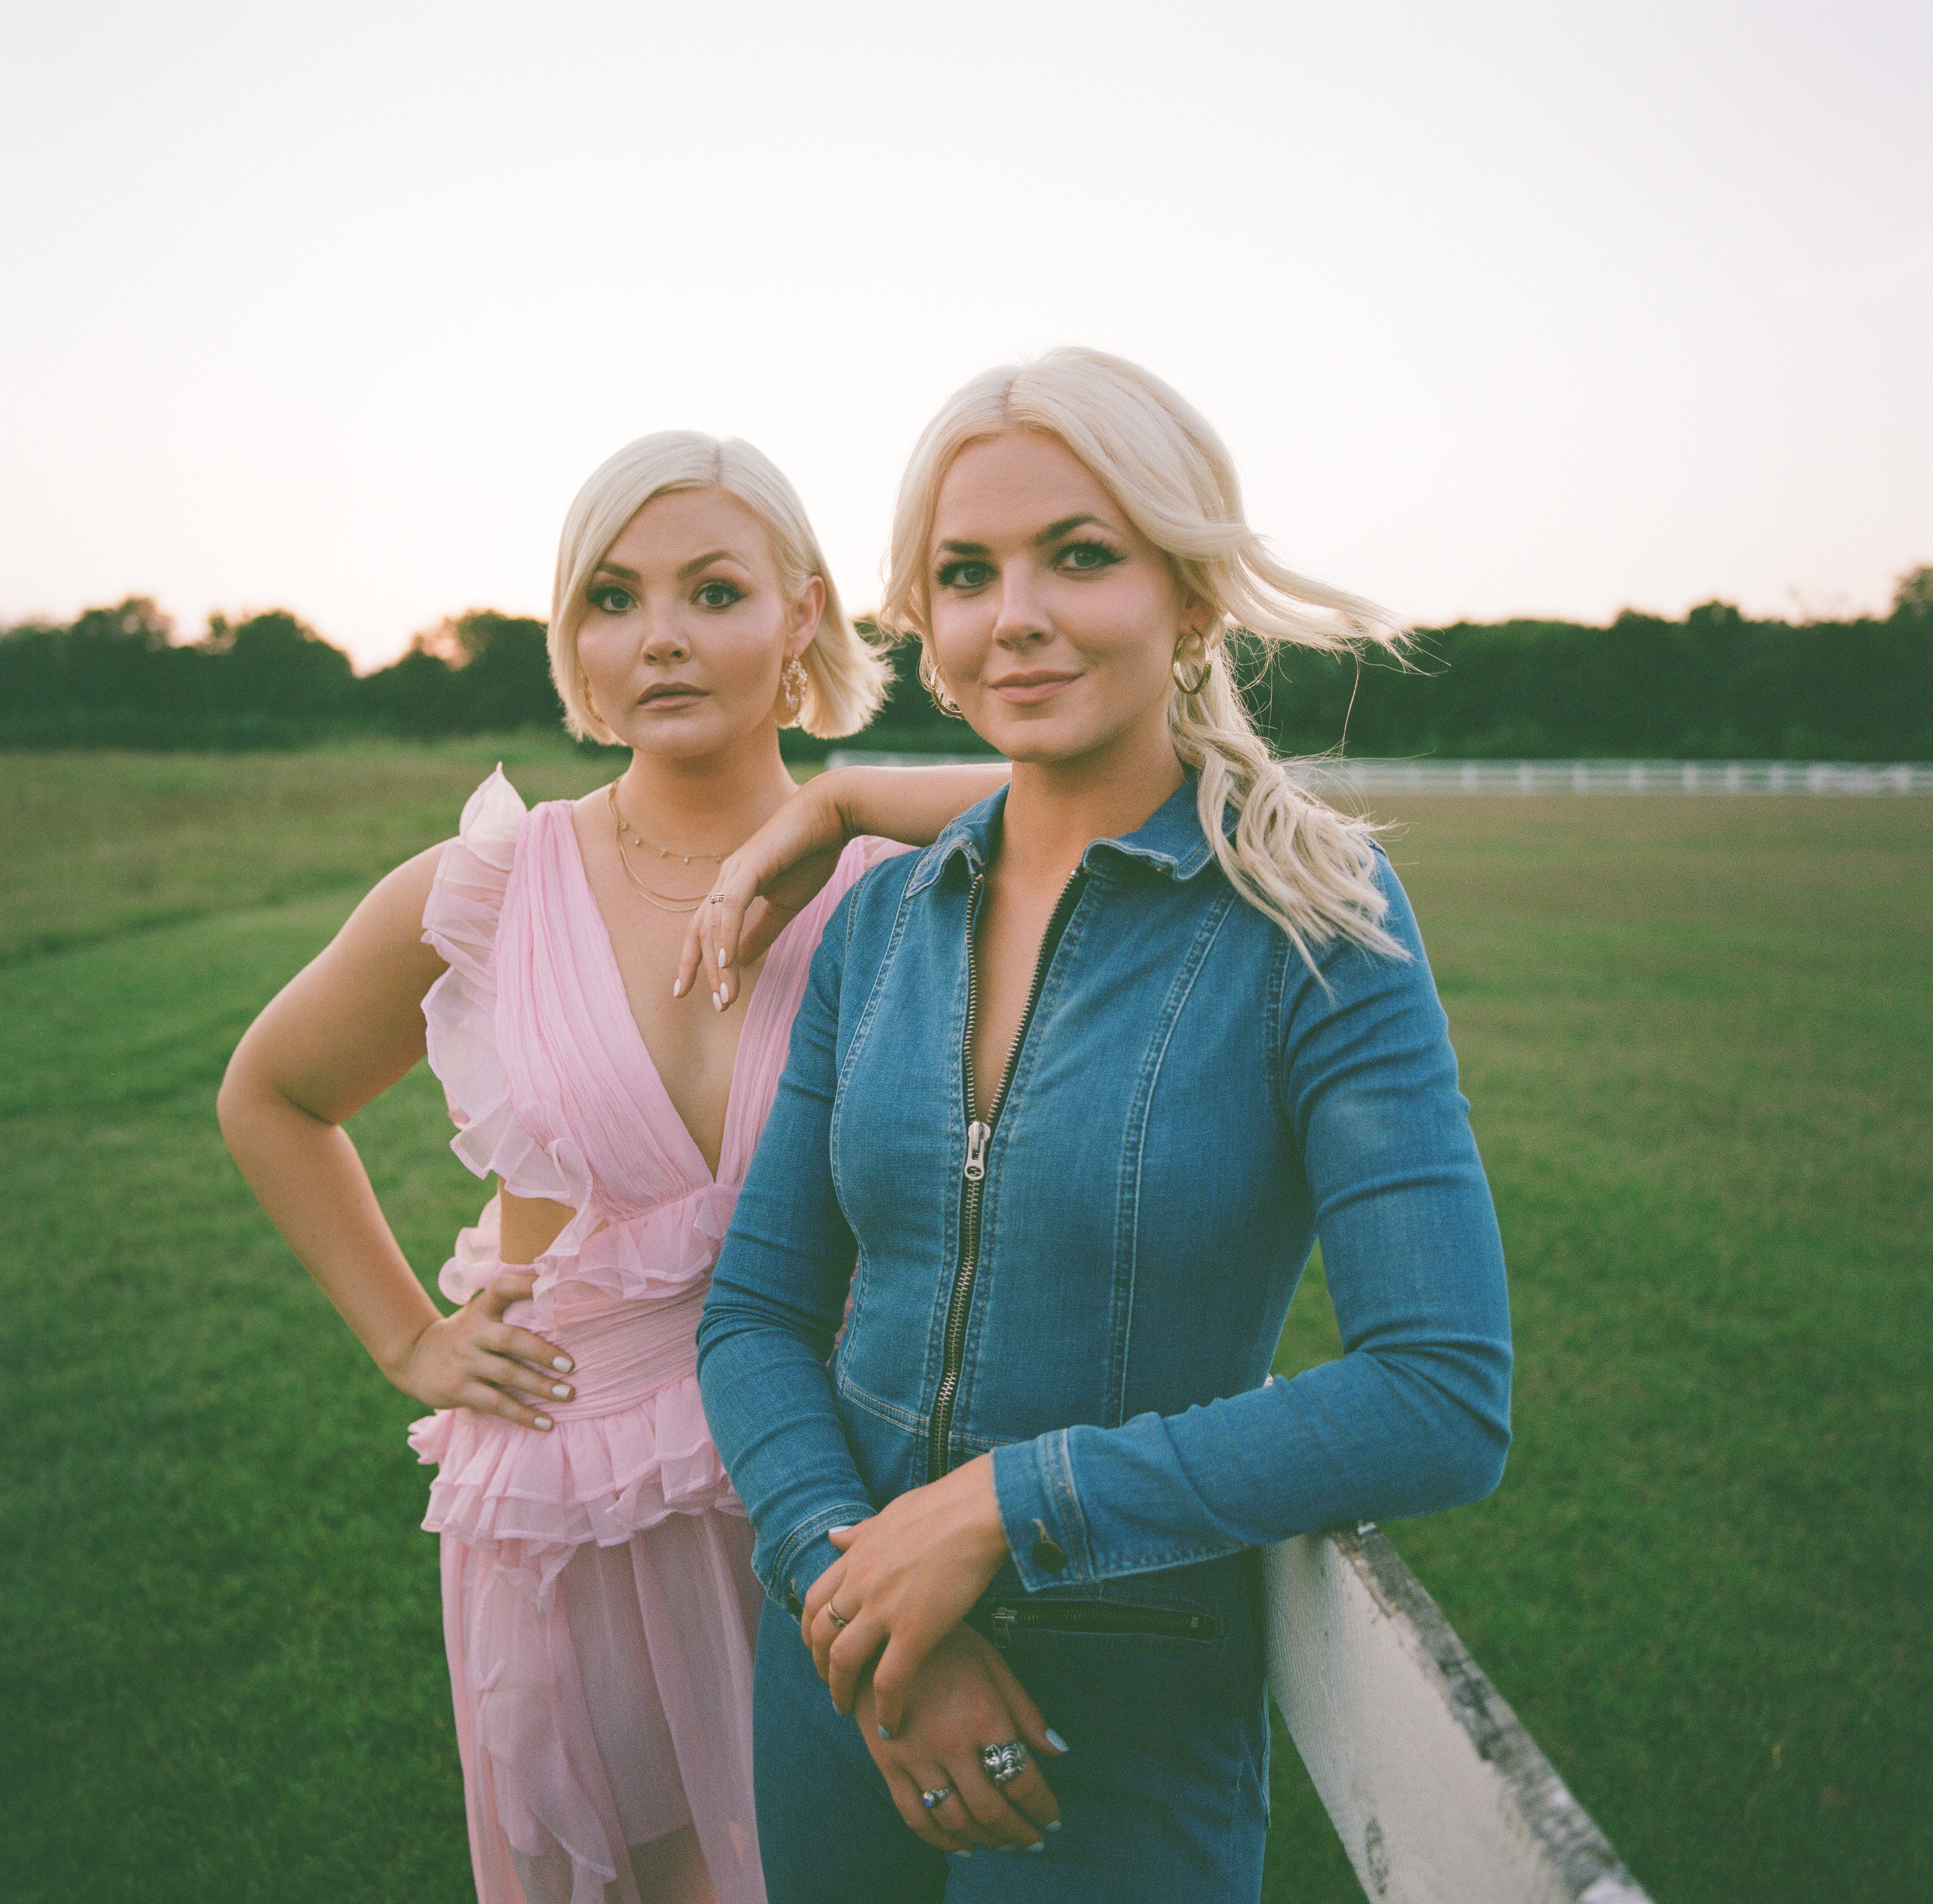 Country duo Tigirlily Gold mature with confidence on debut album 'Blonde'